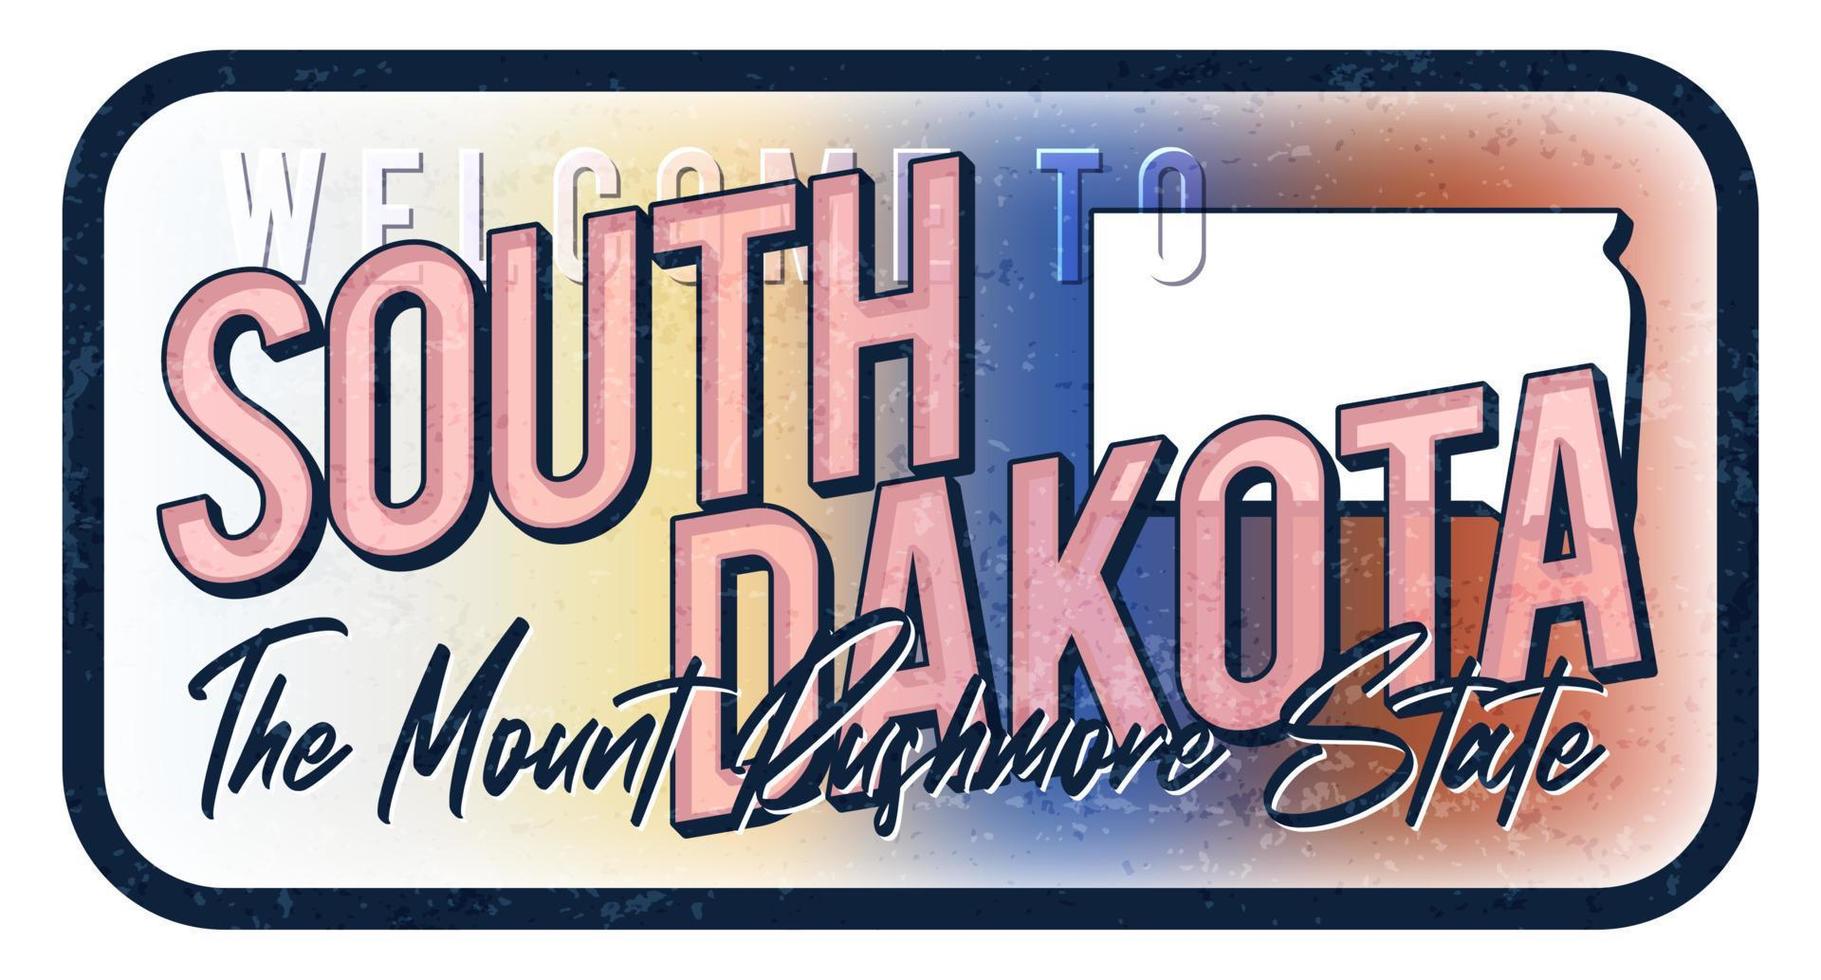 Welcome to south dakota vintage rusty metal sign vector illustration. Vector state map in grunge style with Typography hand drawn lettering.